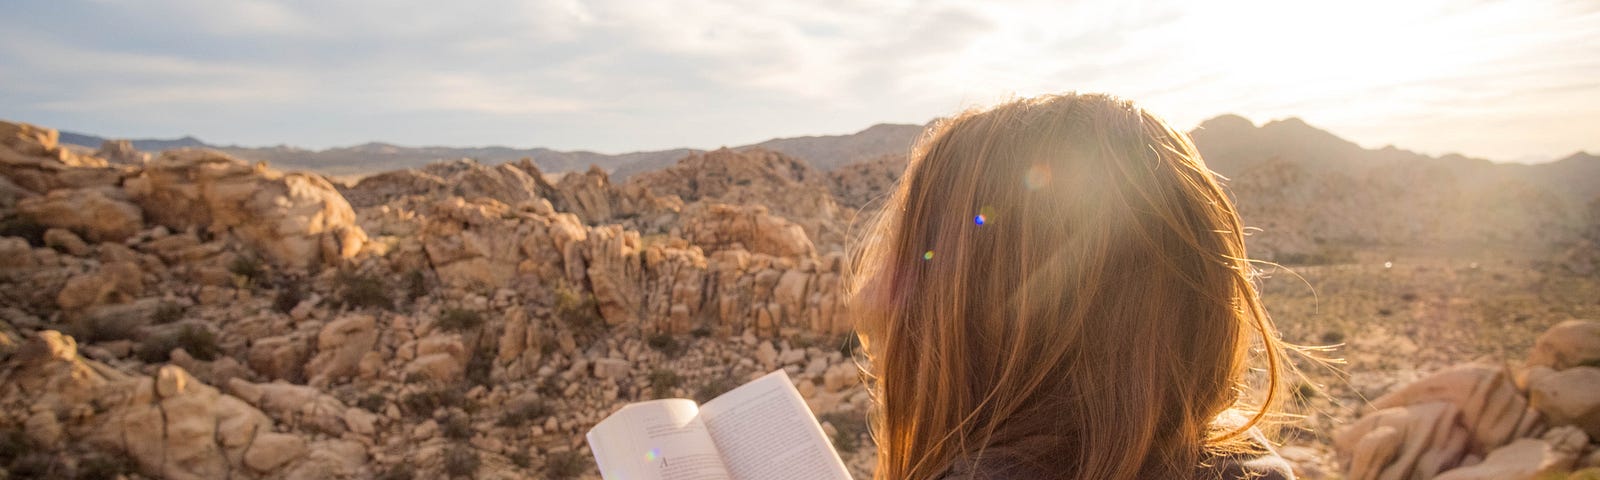 A runner reading a book at the top of a mountain.